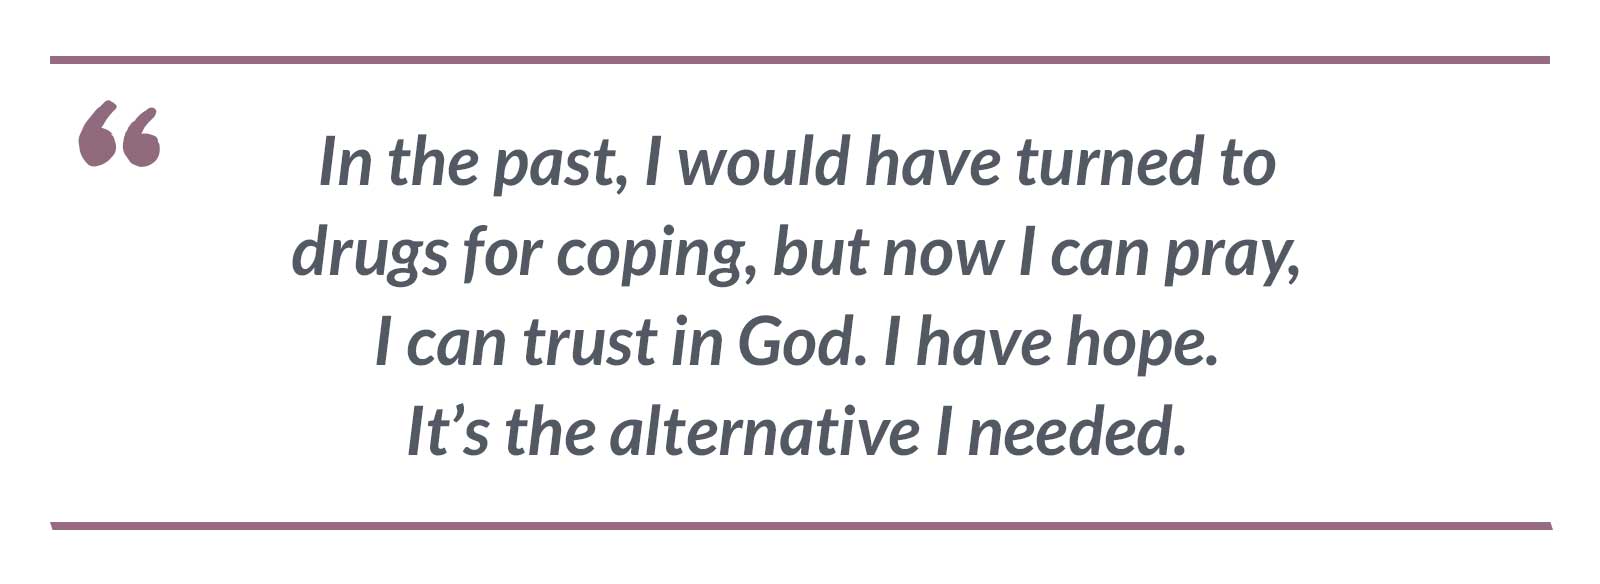 In the past, I would have turned to drugs for coping, but now I can pray, I can trust in God. I have hope. It’s the alternative I needed.-Jennifer